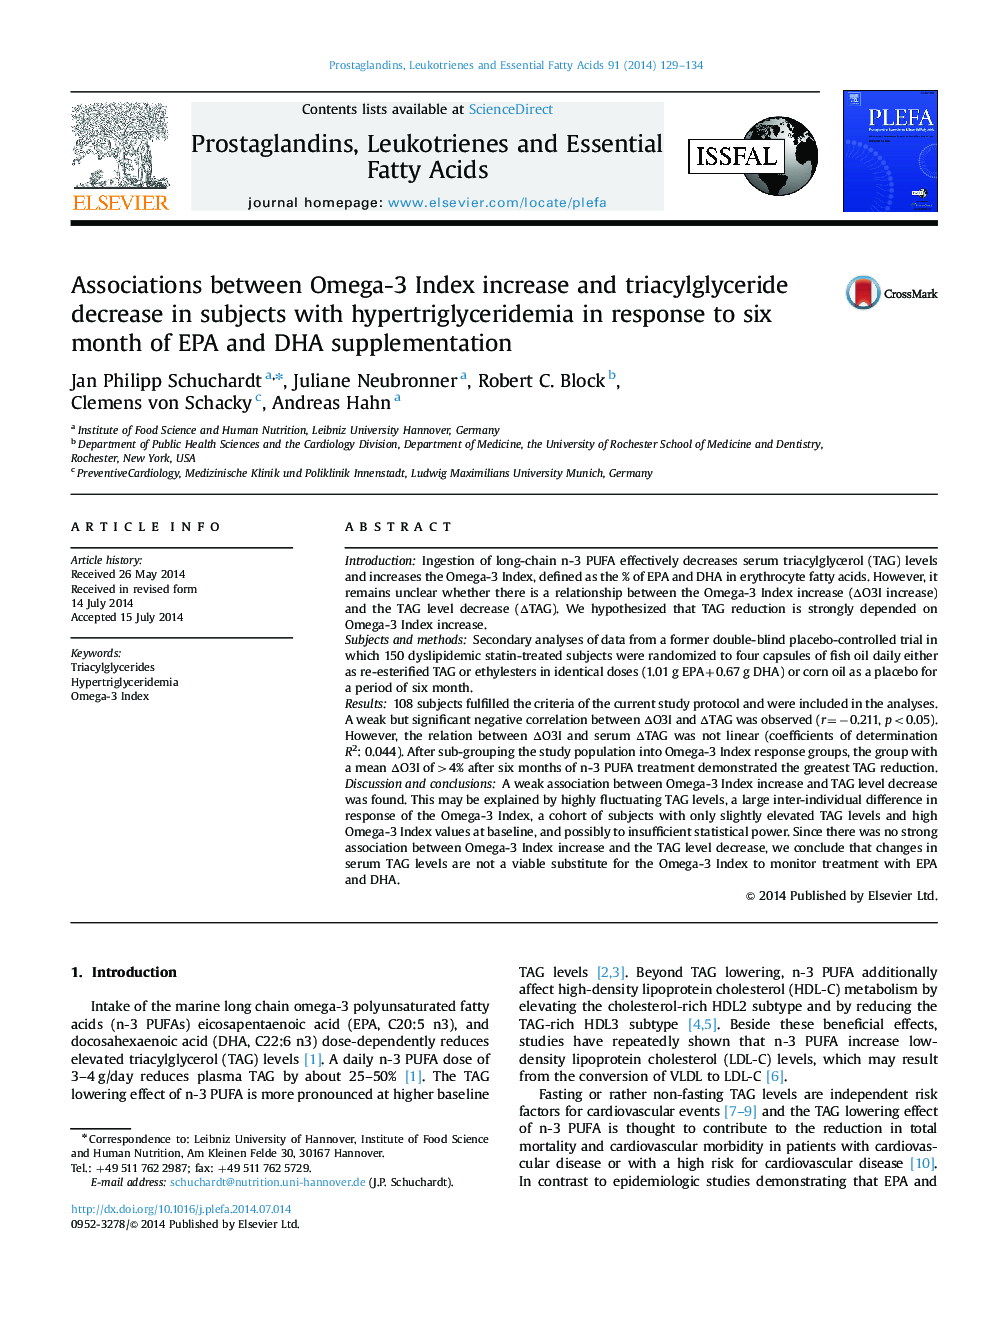 Associations between Omega-3 Index increase and triacylglyceride decrease in subjects with hypertriglyceridemia in response to six month of EPA and DHA supplementation